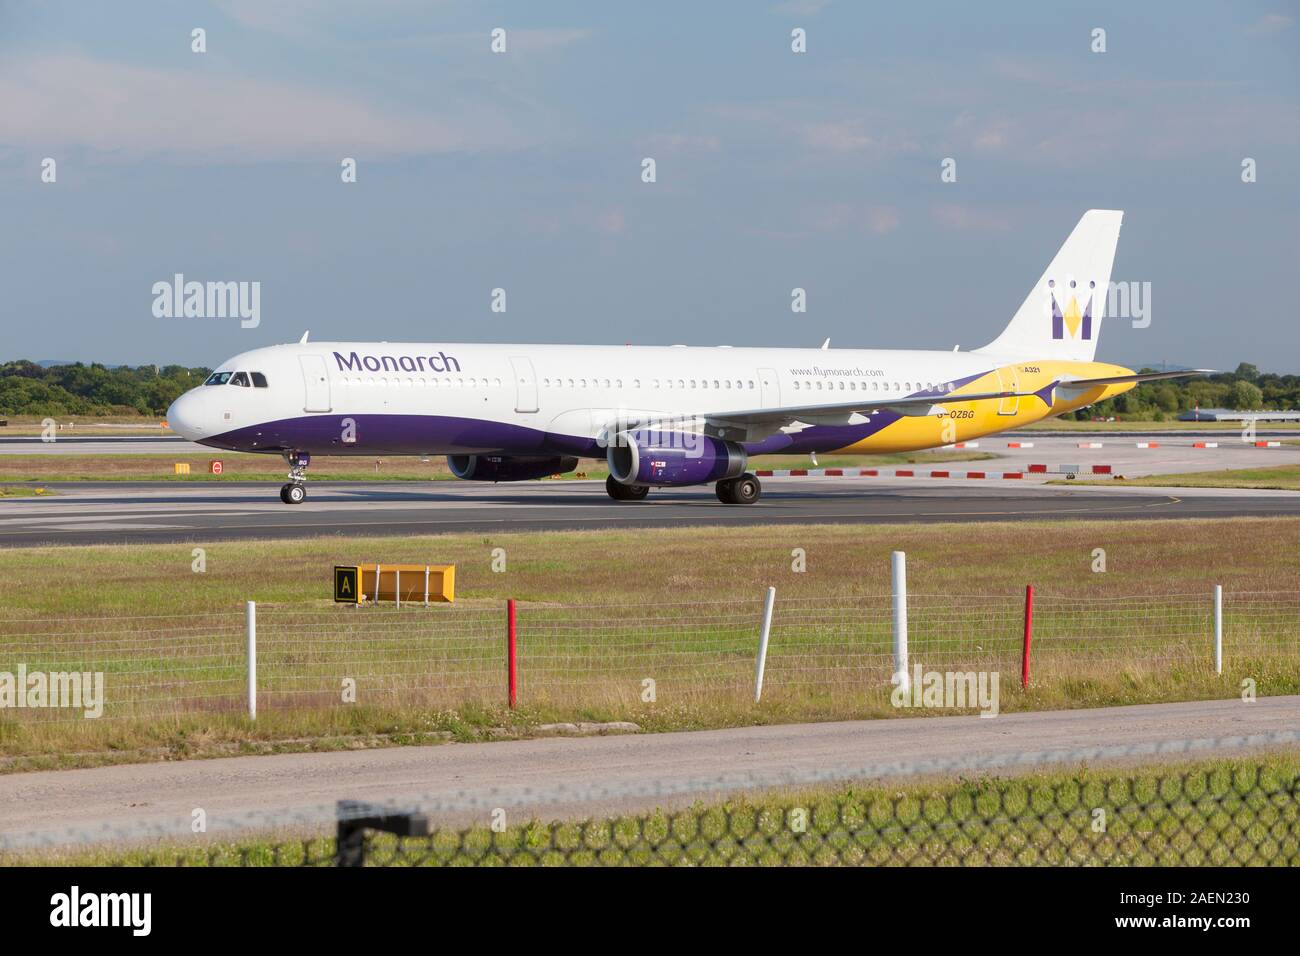 Monarch Airlines aircraft, England Stock Photo